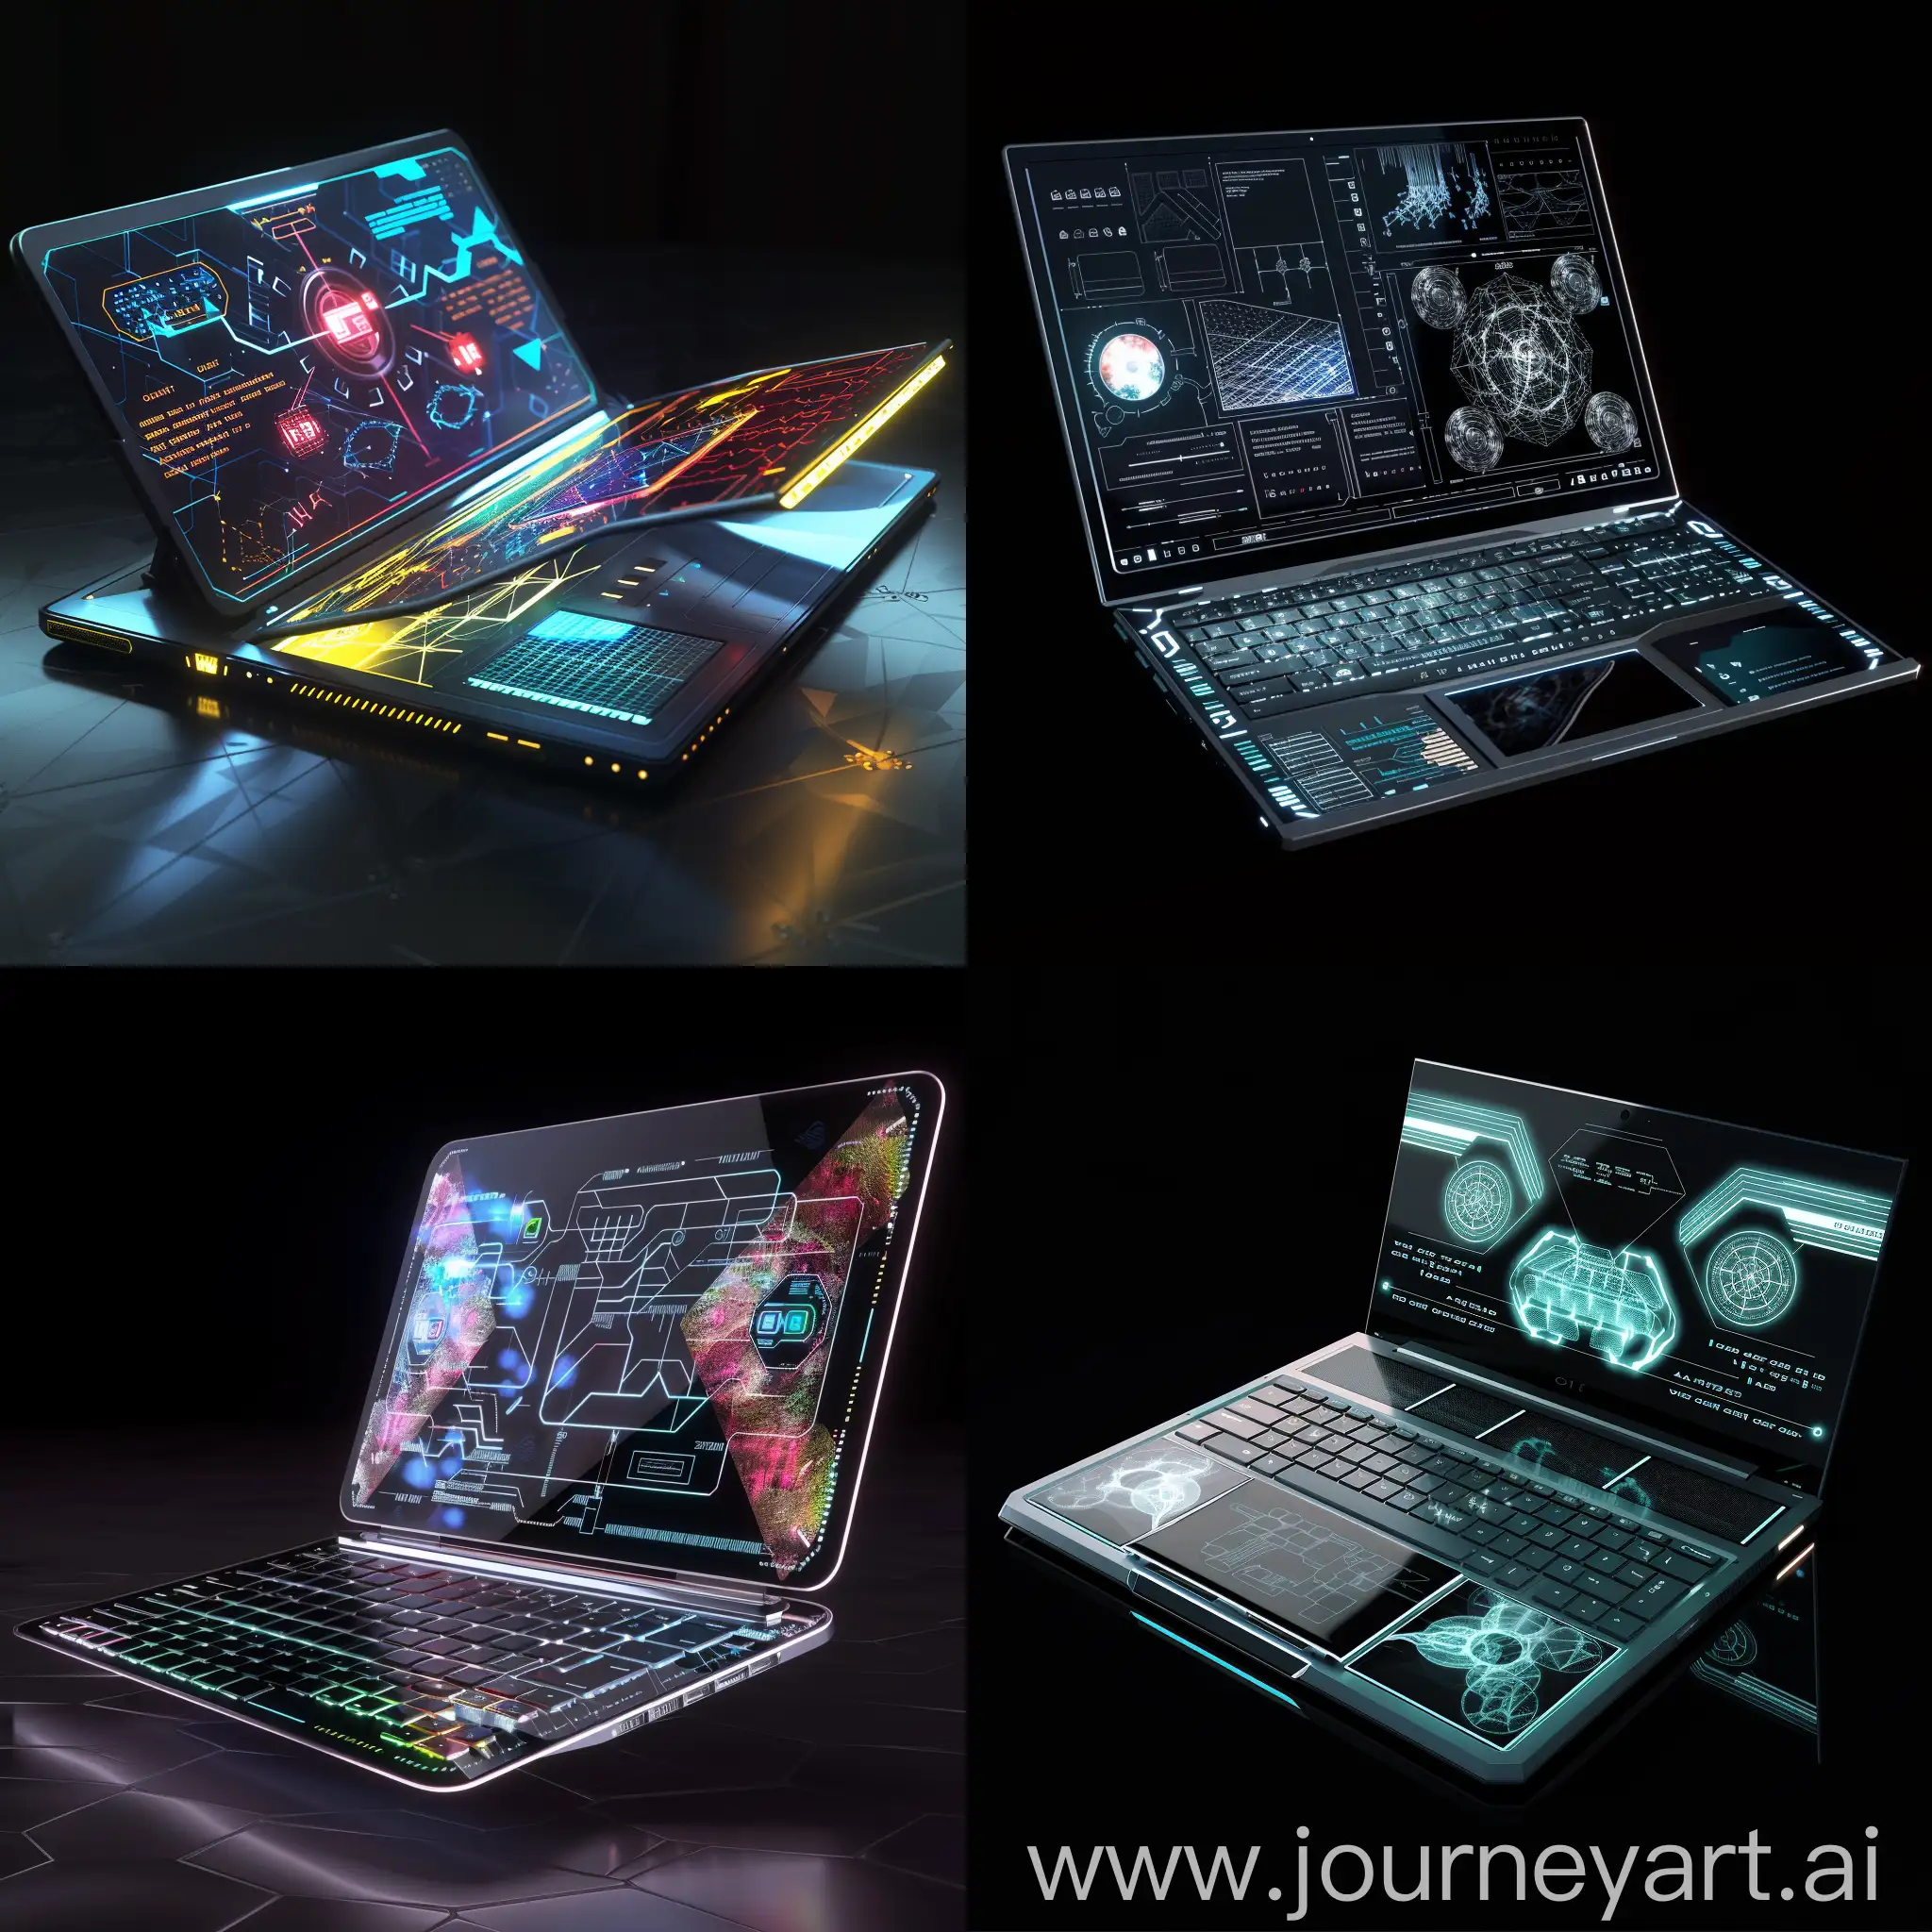 Futuristic laptop, in futuristic style, Quantum Processing Units (QPUs), Artificial Intelligence (AI) Co-processors, Graphene-Based Batteries, Holographic Storage, Flexible and Transparent Displays, Neuromorphic Chips, Integrated Photonic Circuits, Advanced Thermal Management Systems, Biometric Security Modules, Self-Healing Materials, Holographic Keyboards, Flexible and Foldable Form Factors, Augmented Reality (AR) Interfaces, Transparent Displays, Solar-Powered Surfaces, Haptic Feedback Touchpads, Haptic Feedback Touchpads, Modular Design, Adaptive Color and Material Finishes, Advanced Connectivity Ports, Quantum Processing Units (QPUs), Neuromorphic Chips, Optical Computing, Graphene-Based Transistors, 3D Stacked Memory, Magnetoresistive Random-Access Memory (MRAM), DNA Data Storage, Advanced Thermal Management, Integrated Photonics, Energy Harvesting Technologies, Flexible Displays, Holographic Projection, E-Paper Displays, Adaptive Physical Keyboards, Smart Material Chassis, Advanced Biometric Authentication, Wireless Power and Data Transfer, Modular Expansion Ports, Nano-Coated Surfaces, Augmented Reality (AR) Integration, unreal engine 5 --stylize 1000